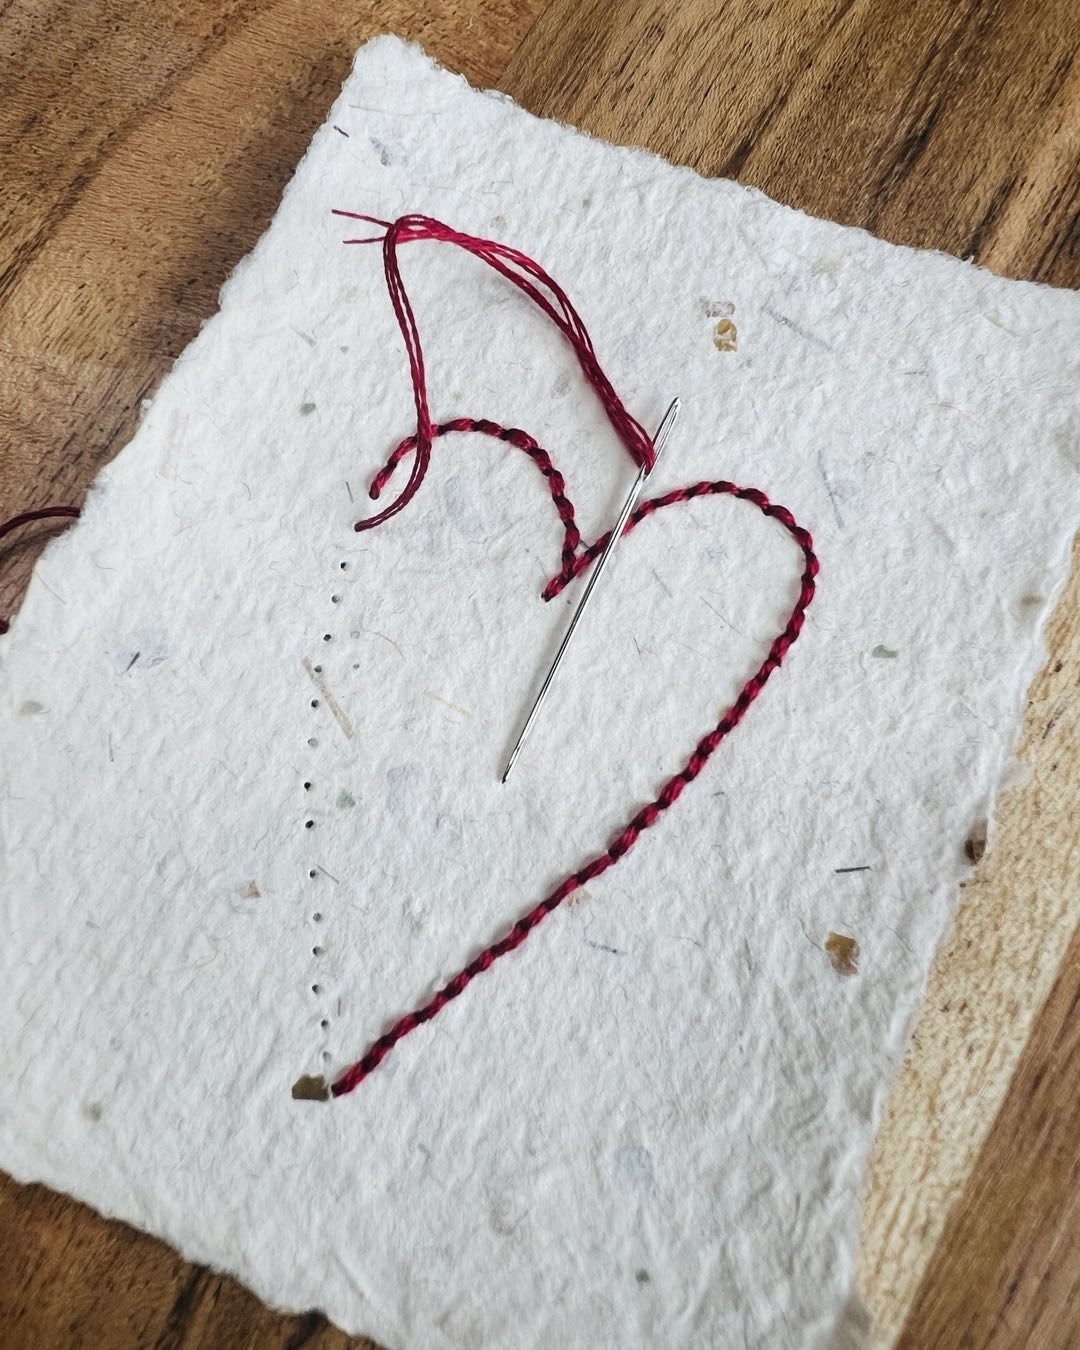 It&rsquo;s already the 7th!
Starting my Valentines ❤️

#diyvalentines
#recycledvalentinescraft
#embroideryonpaper
#papermaking
#handmadepaper
#woodendeckle